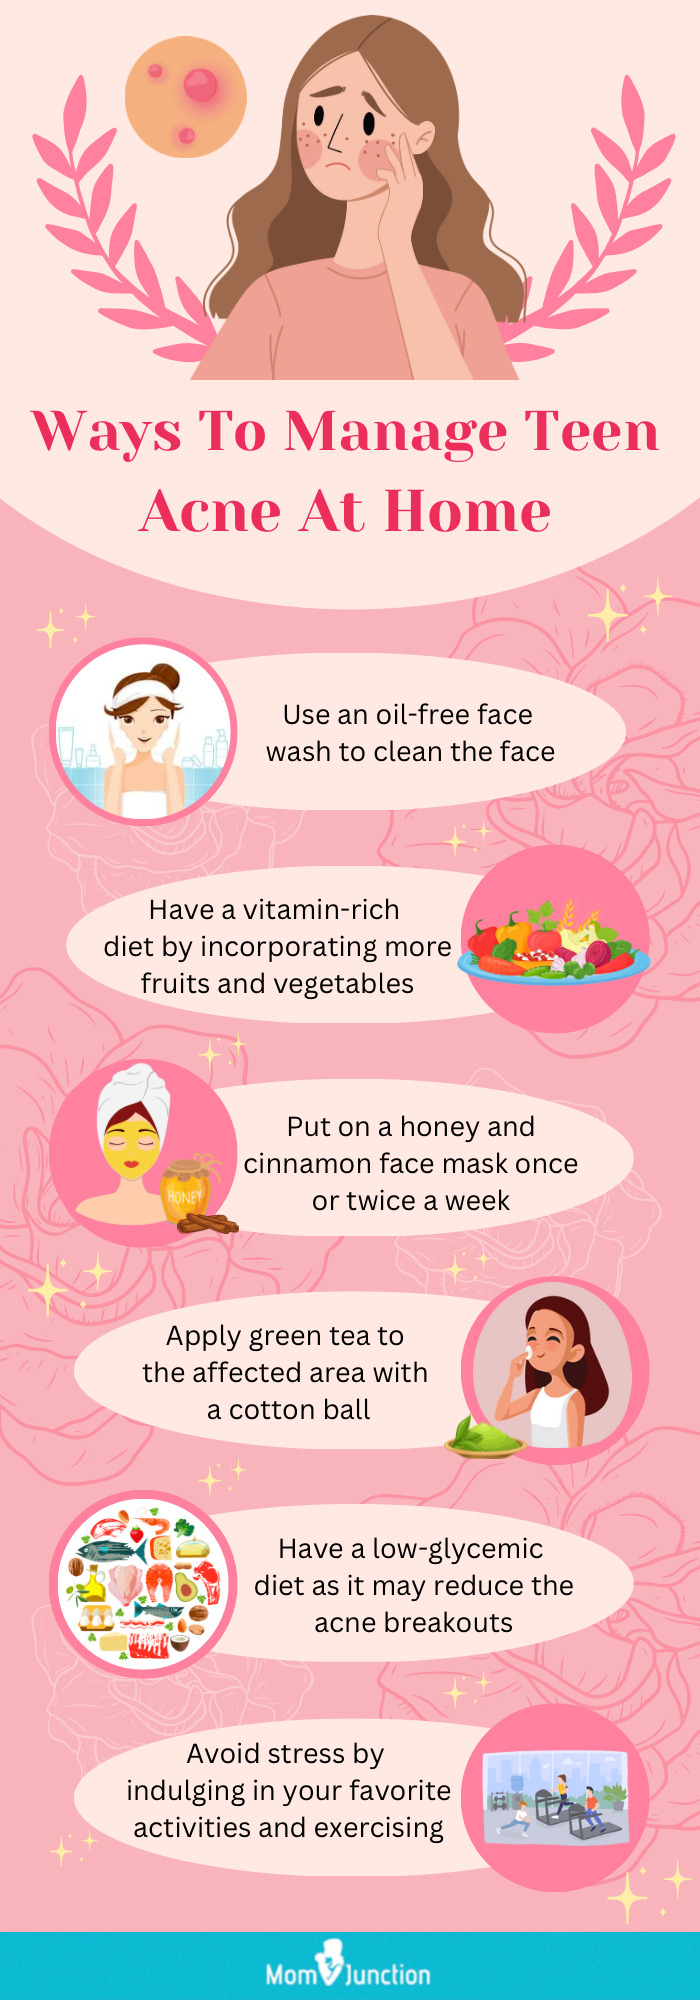 prevent acne in teens (infographic)